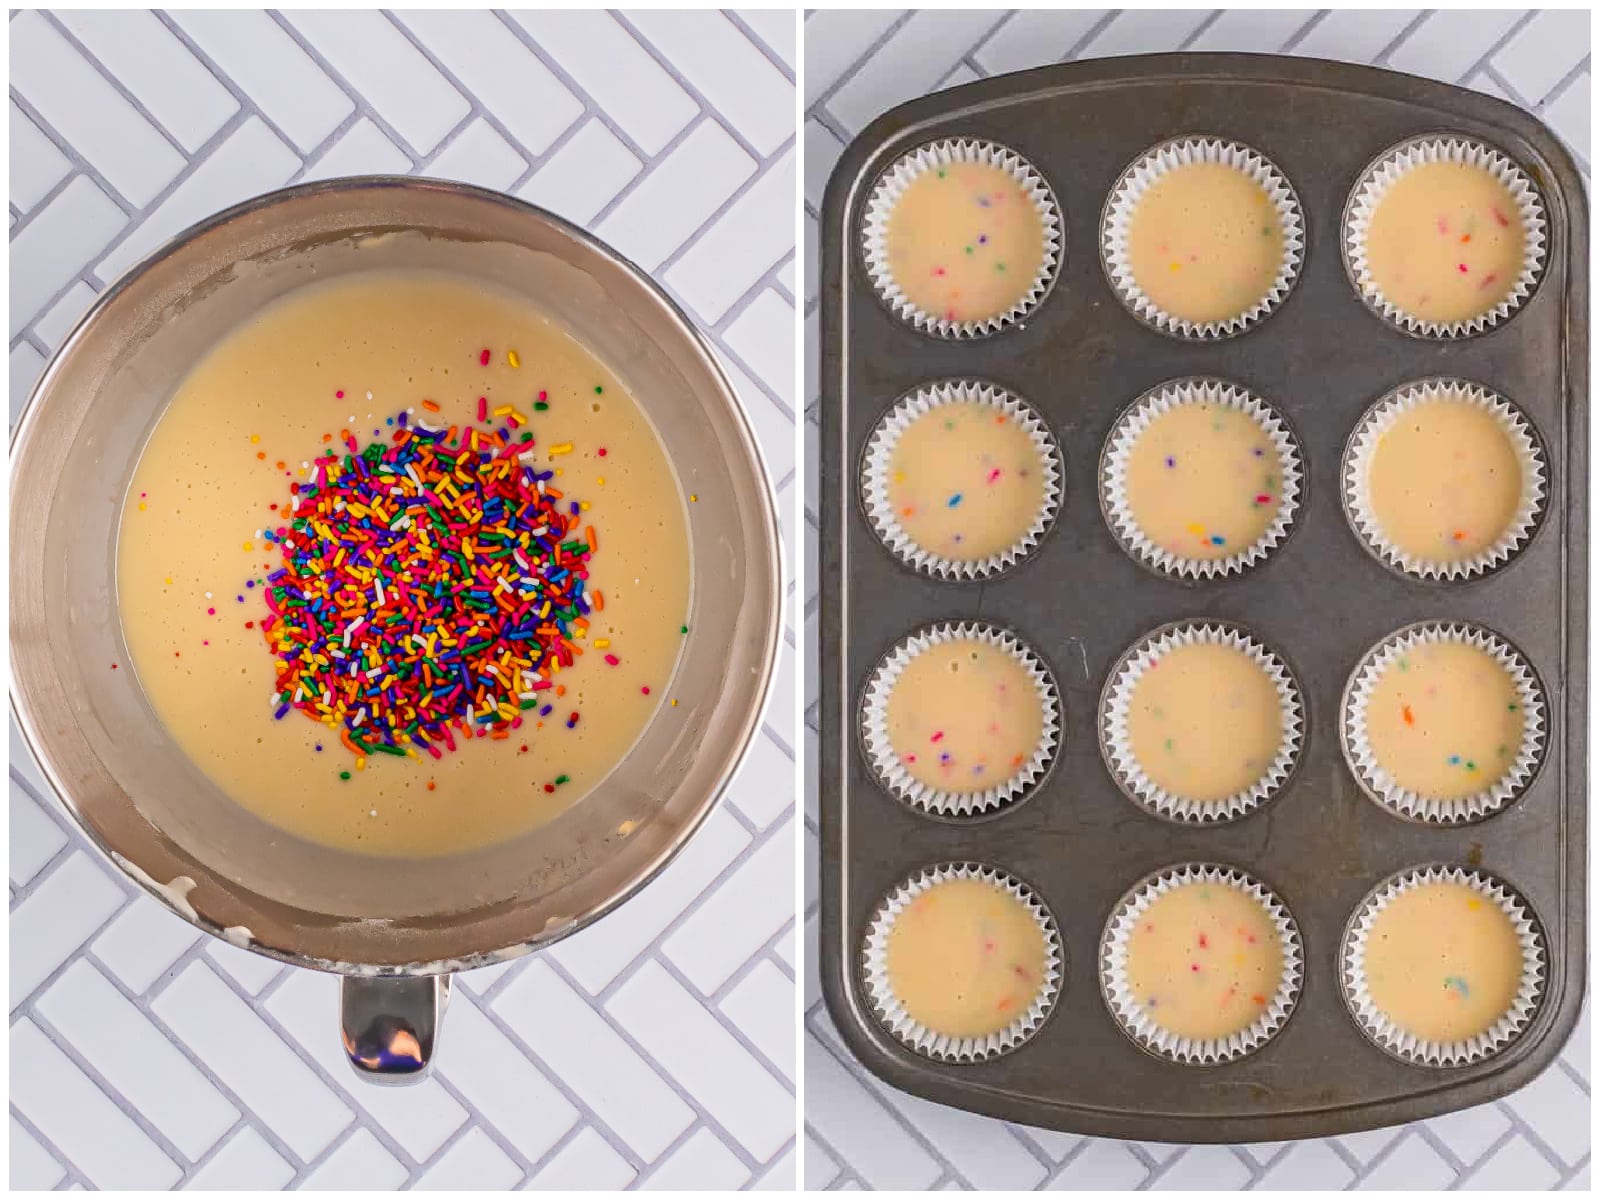 college of two photos: milk, oil and sprinkles added to cupcake batter; cupcake batter put into cupcake liners in a muffin tin. 